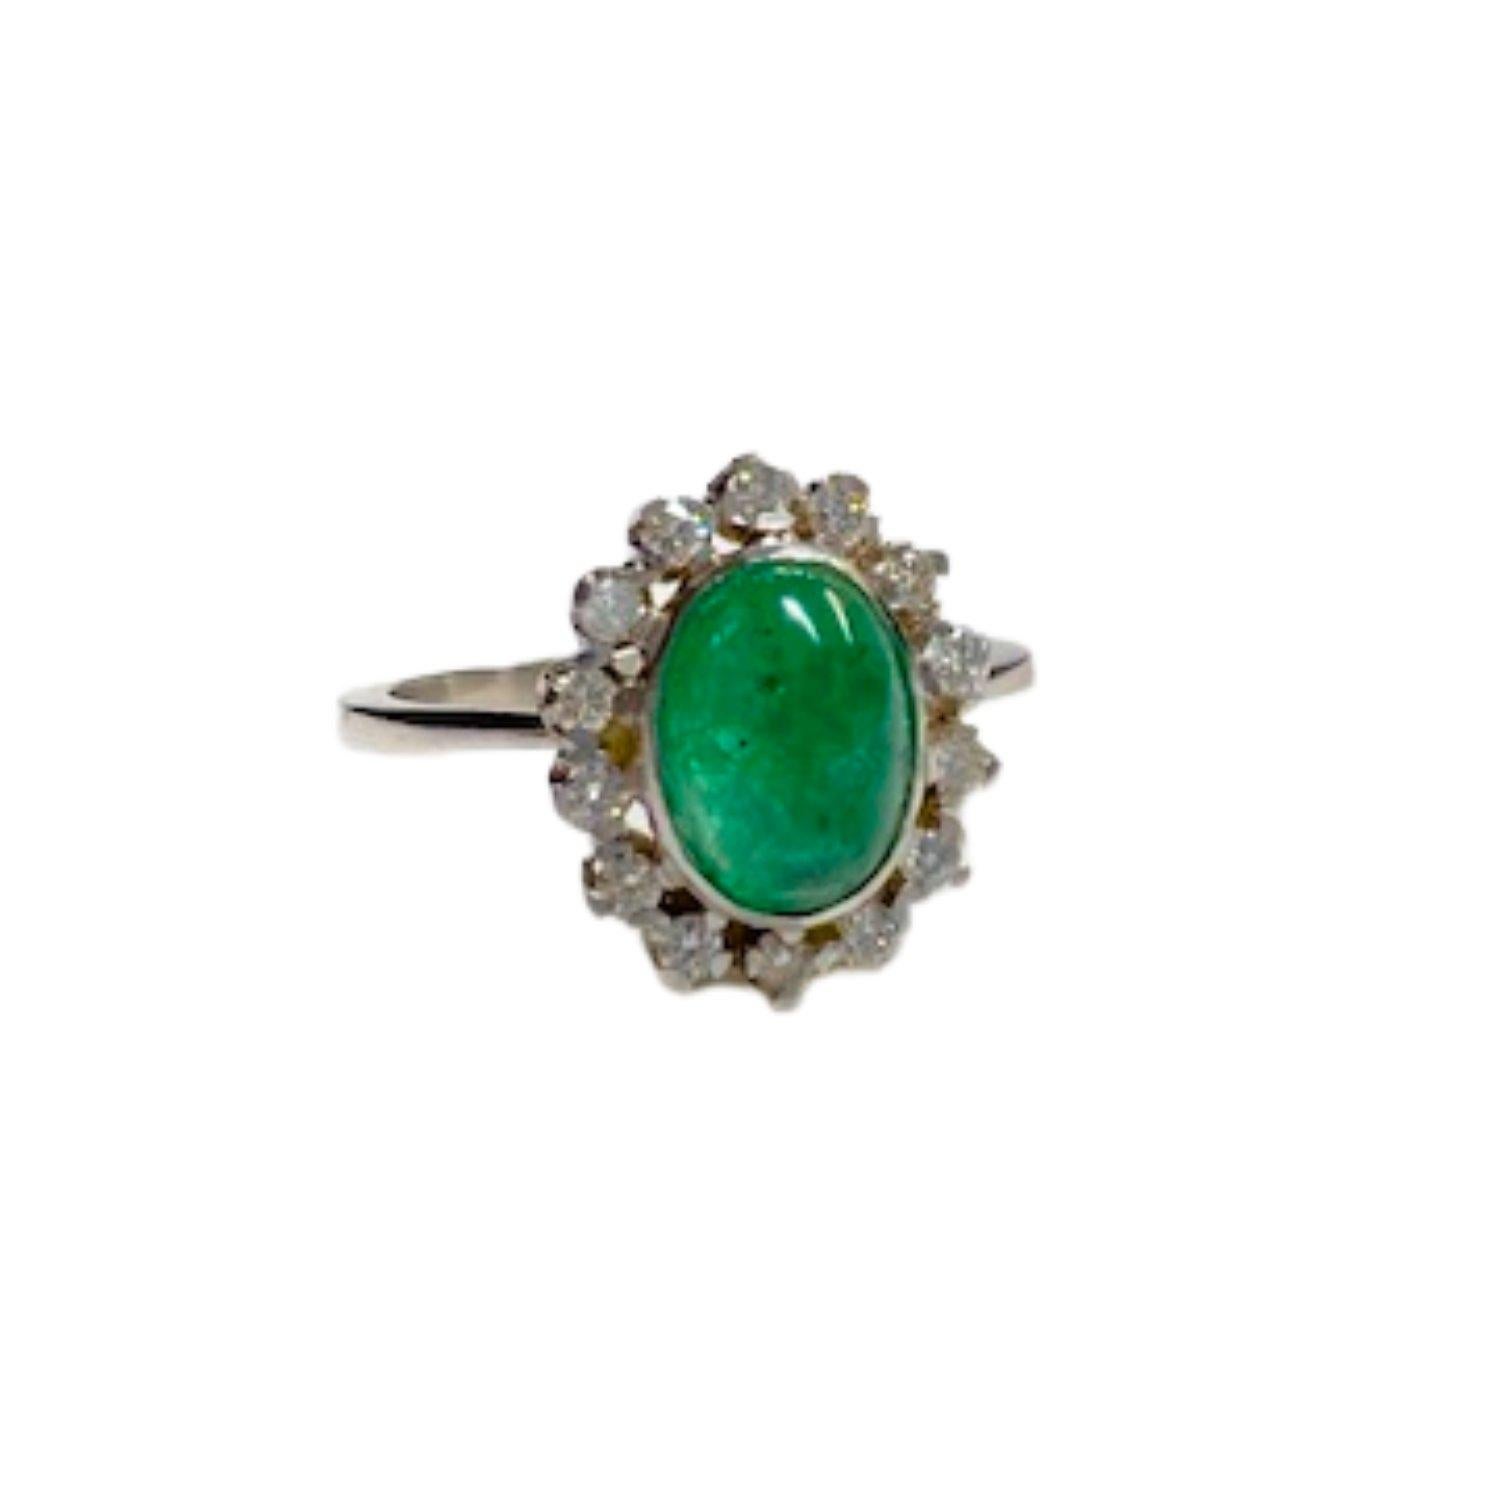 Envelop yourself in timeless elegance with this Art Deco-inspired platinum rosette ring, adorned with diamonds and a Colombian emerald. Weighing 4.30 grams and sized at 15/55, this ring showcases a rosette design measuring 1.3 cm x 1.00 cm,